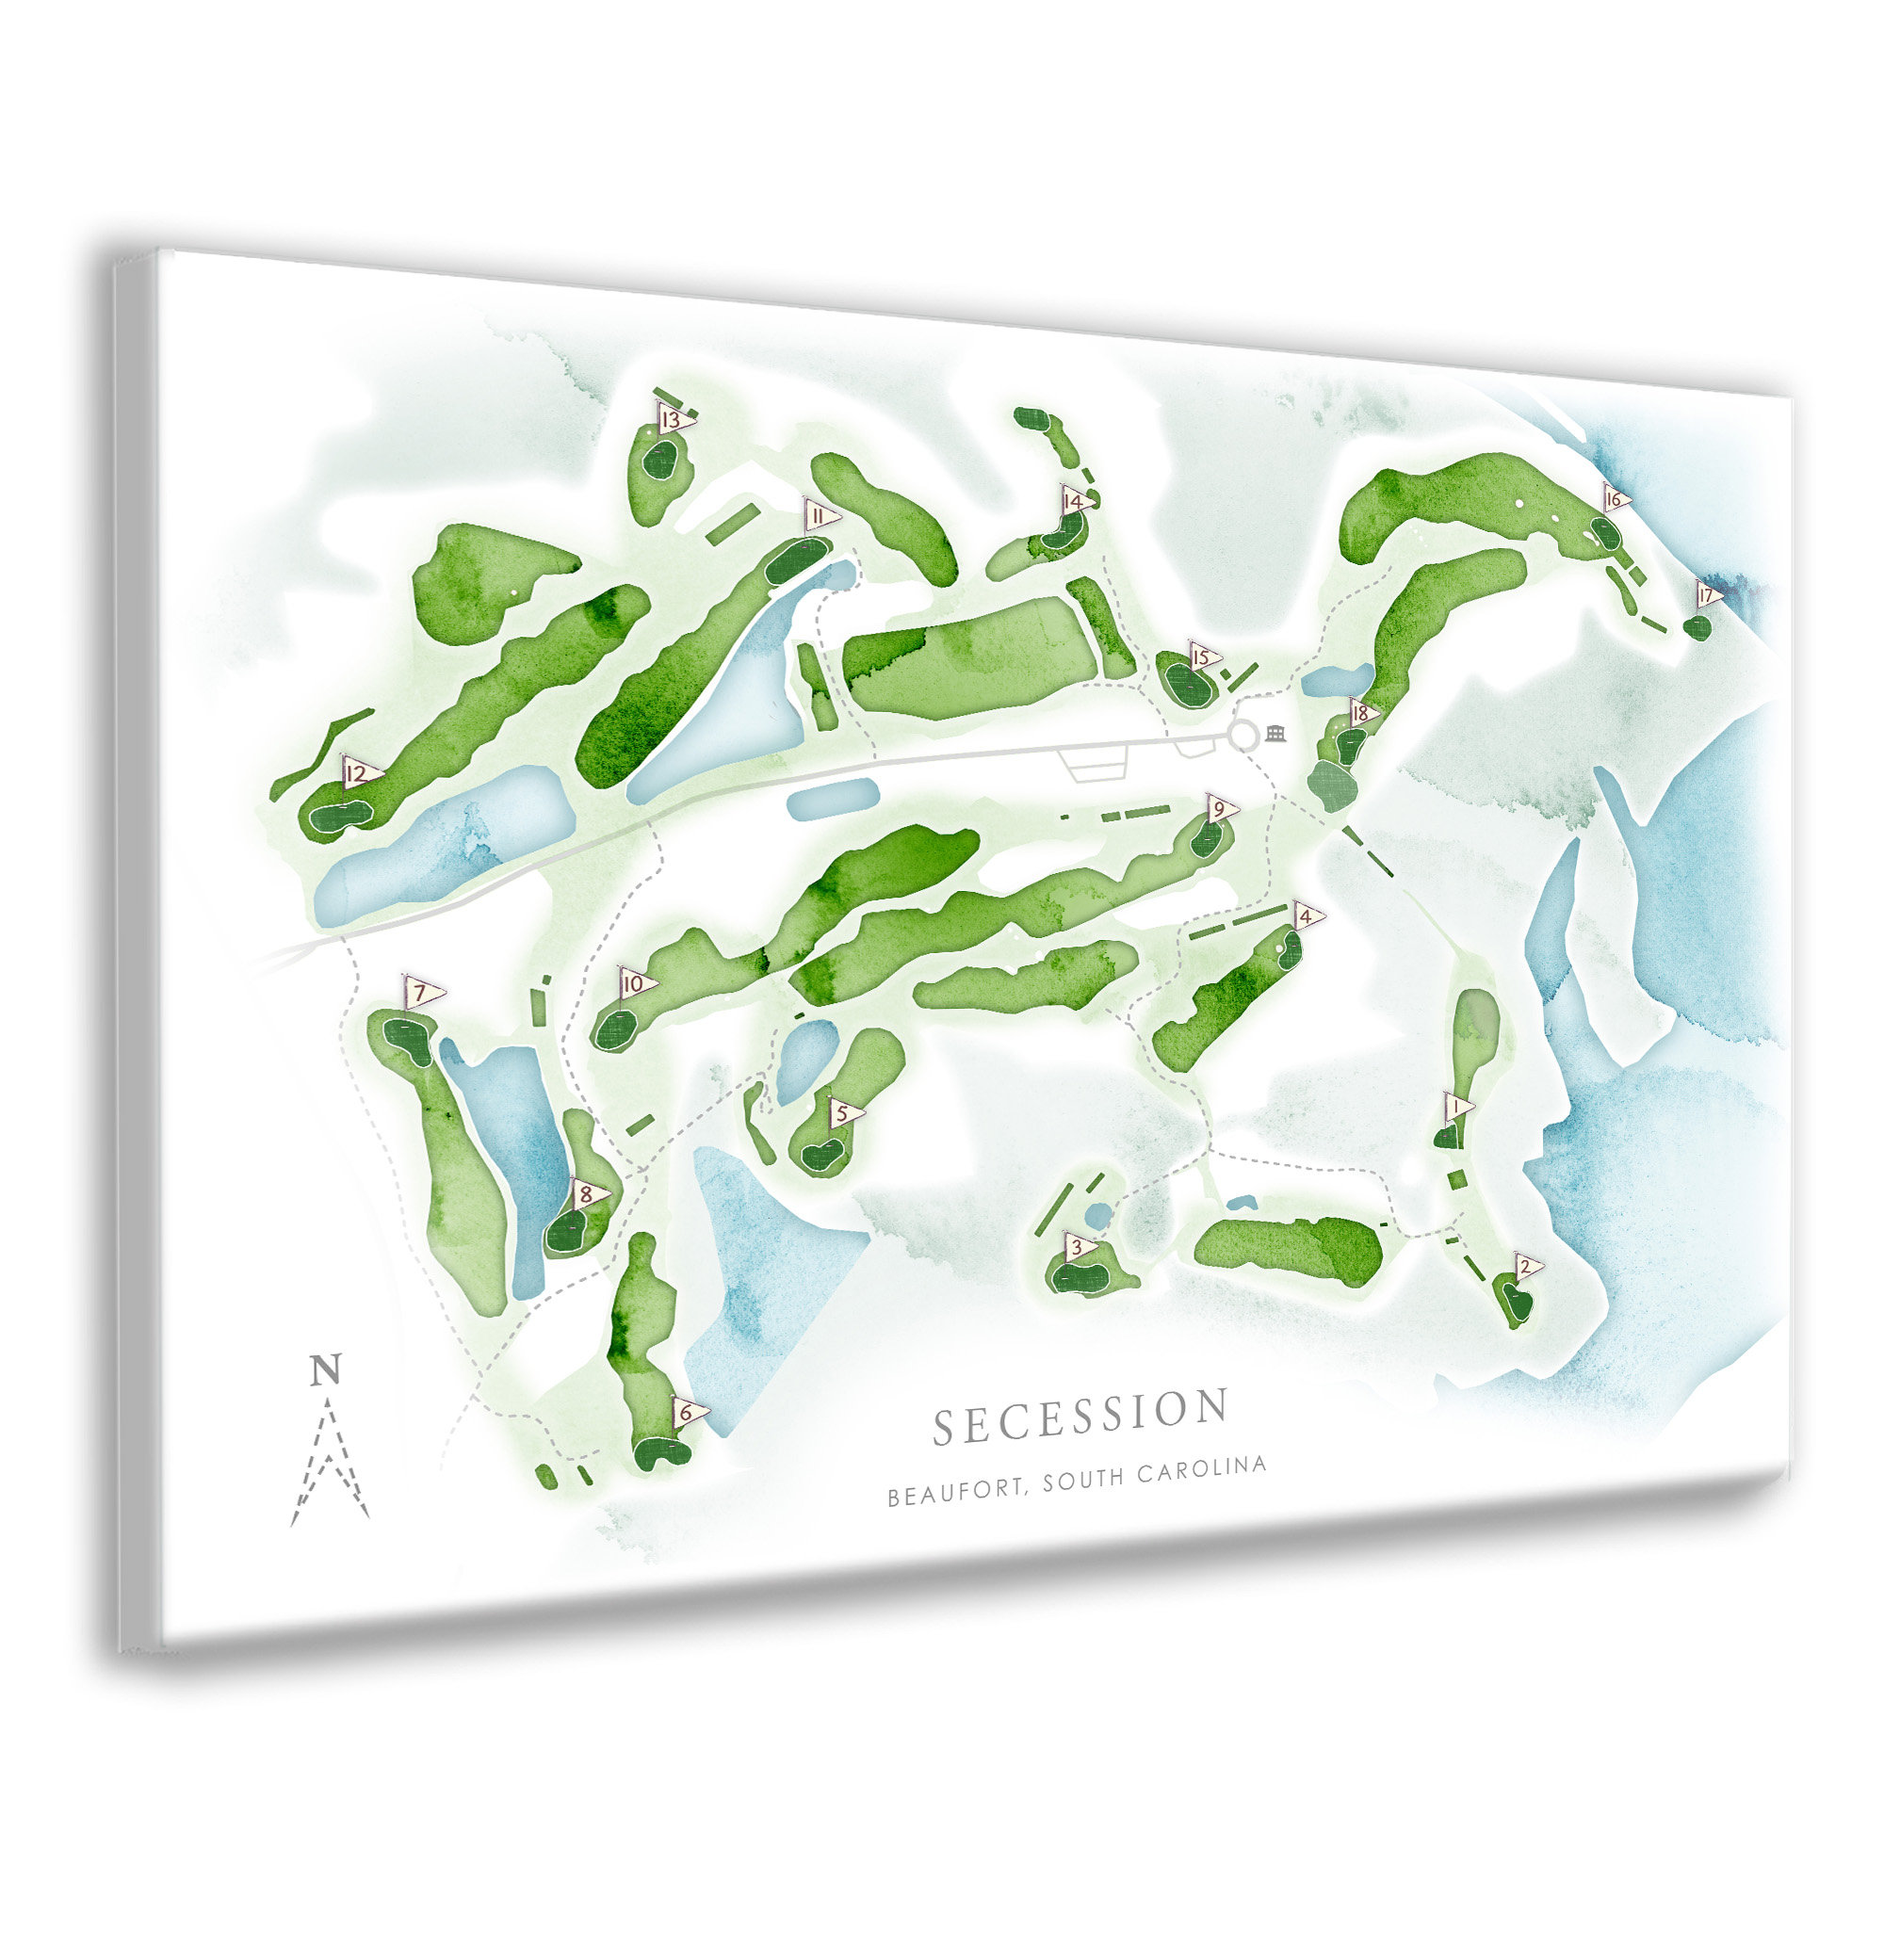 Secession Golf Course Map SC Golf Club Layout Print Framed - Etsy